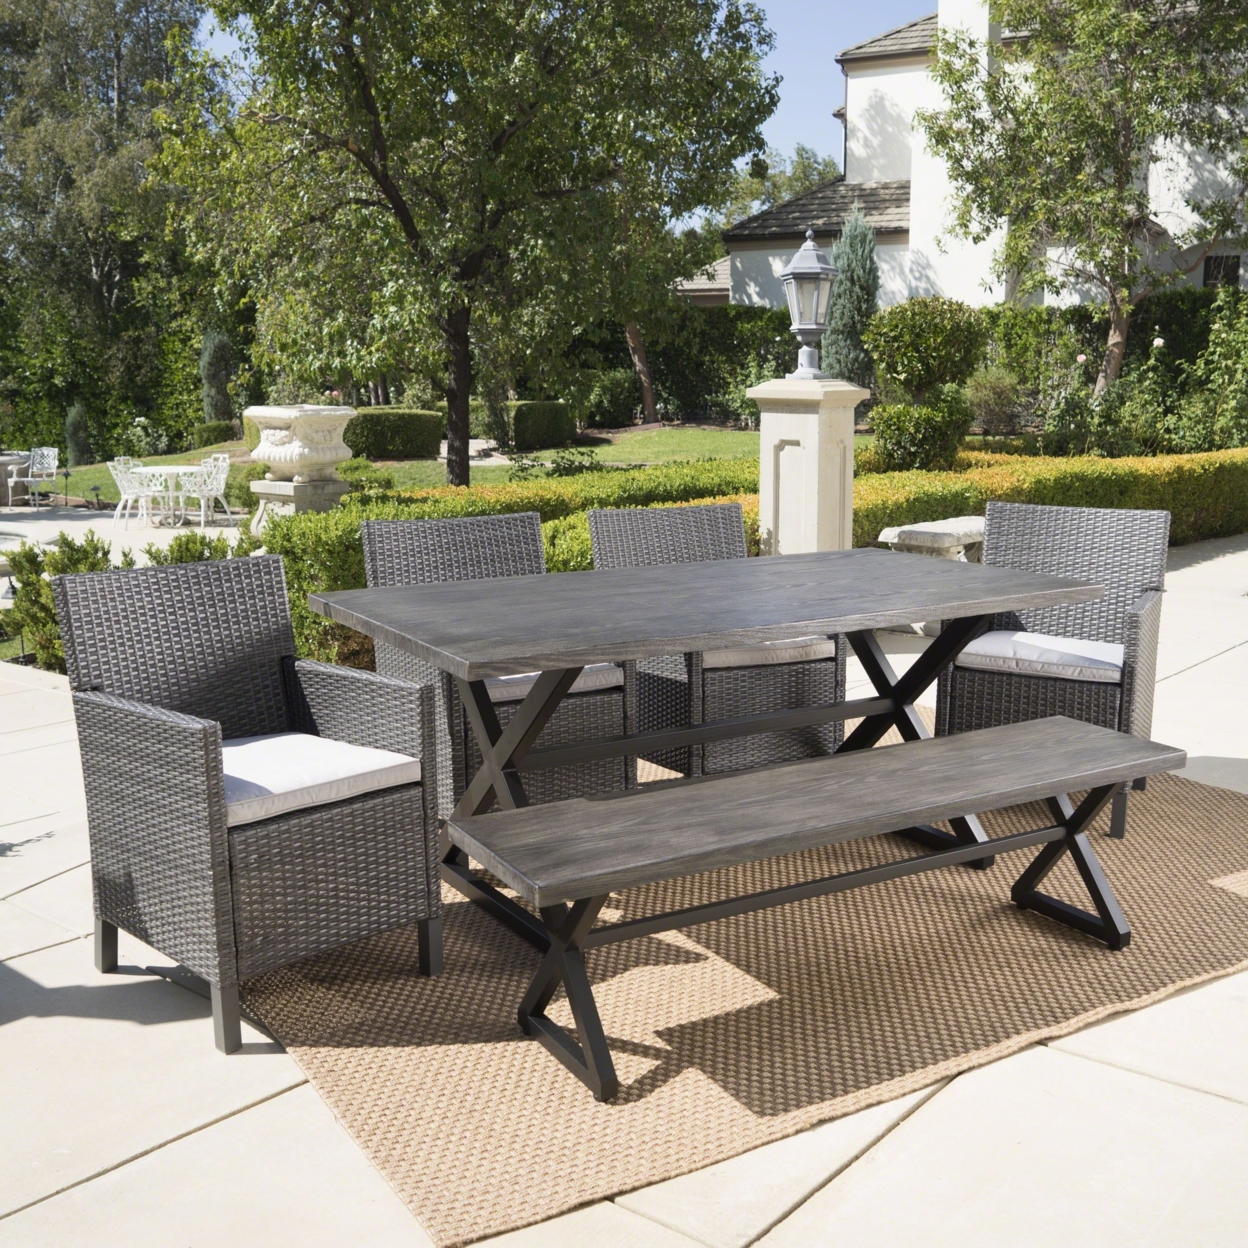 Ainna Outdoor 6 Piece Wicker Dining Set With Aluminum Dining Table - Multi-brown/Light Brown